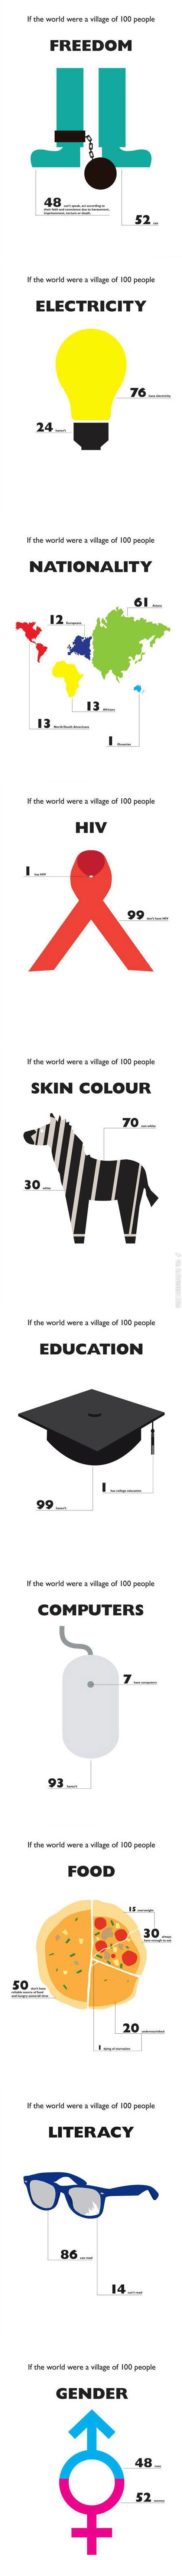 If+the+world+were+a+village+of+100+people%26%238230%3B